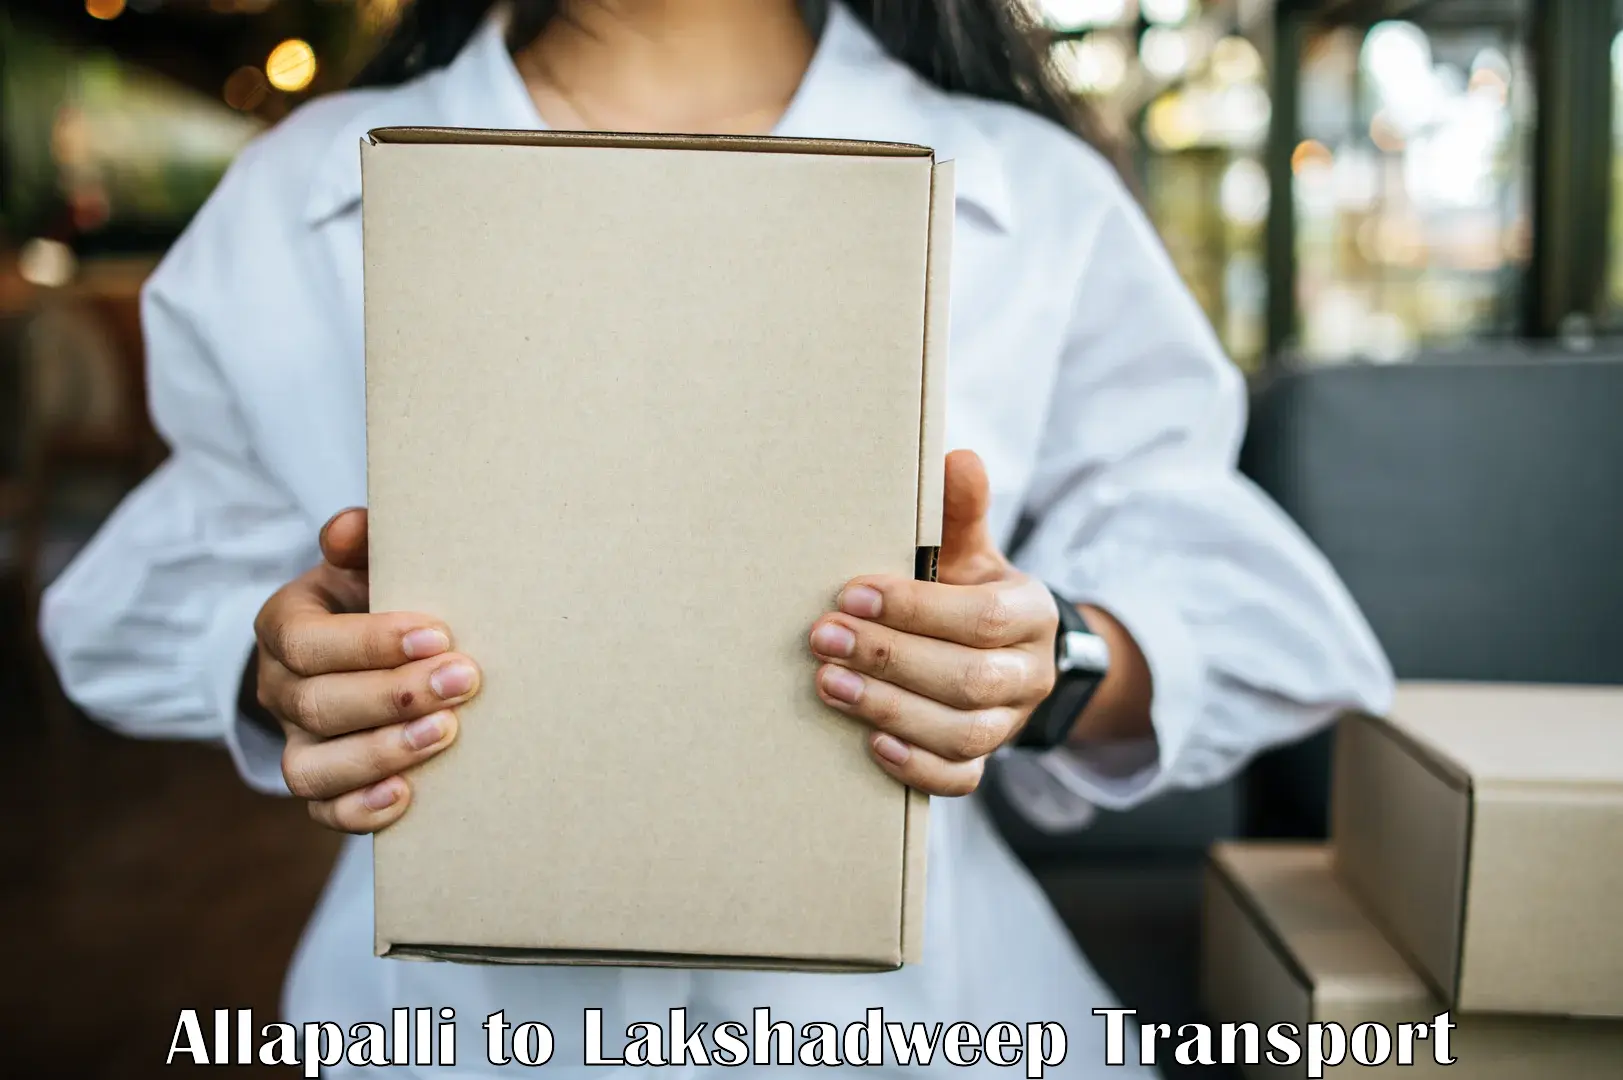 Transport in sharing Allapalli to Lakshadweep